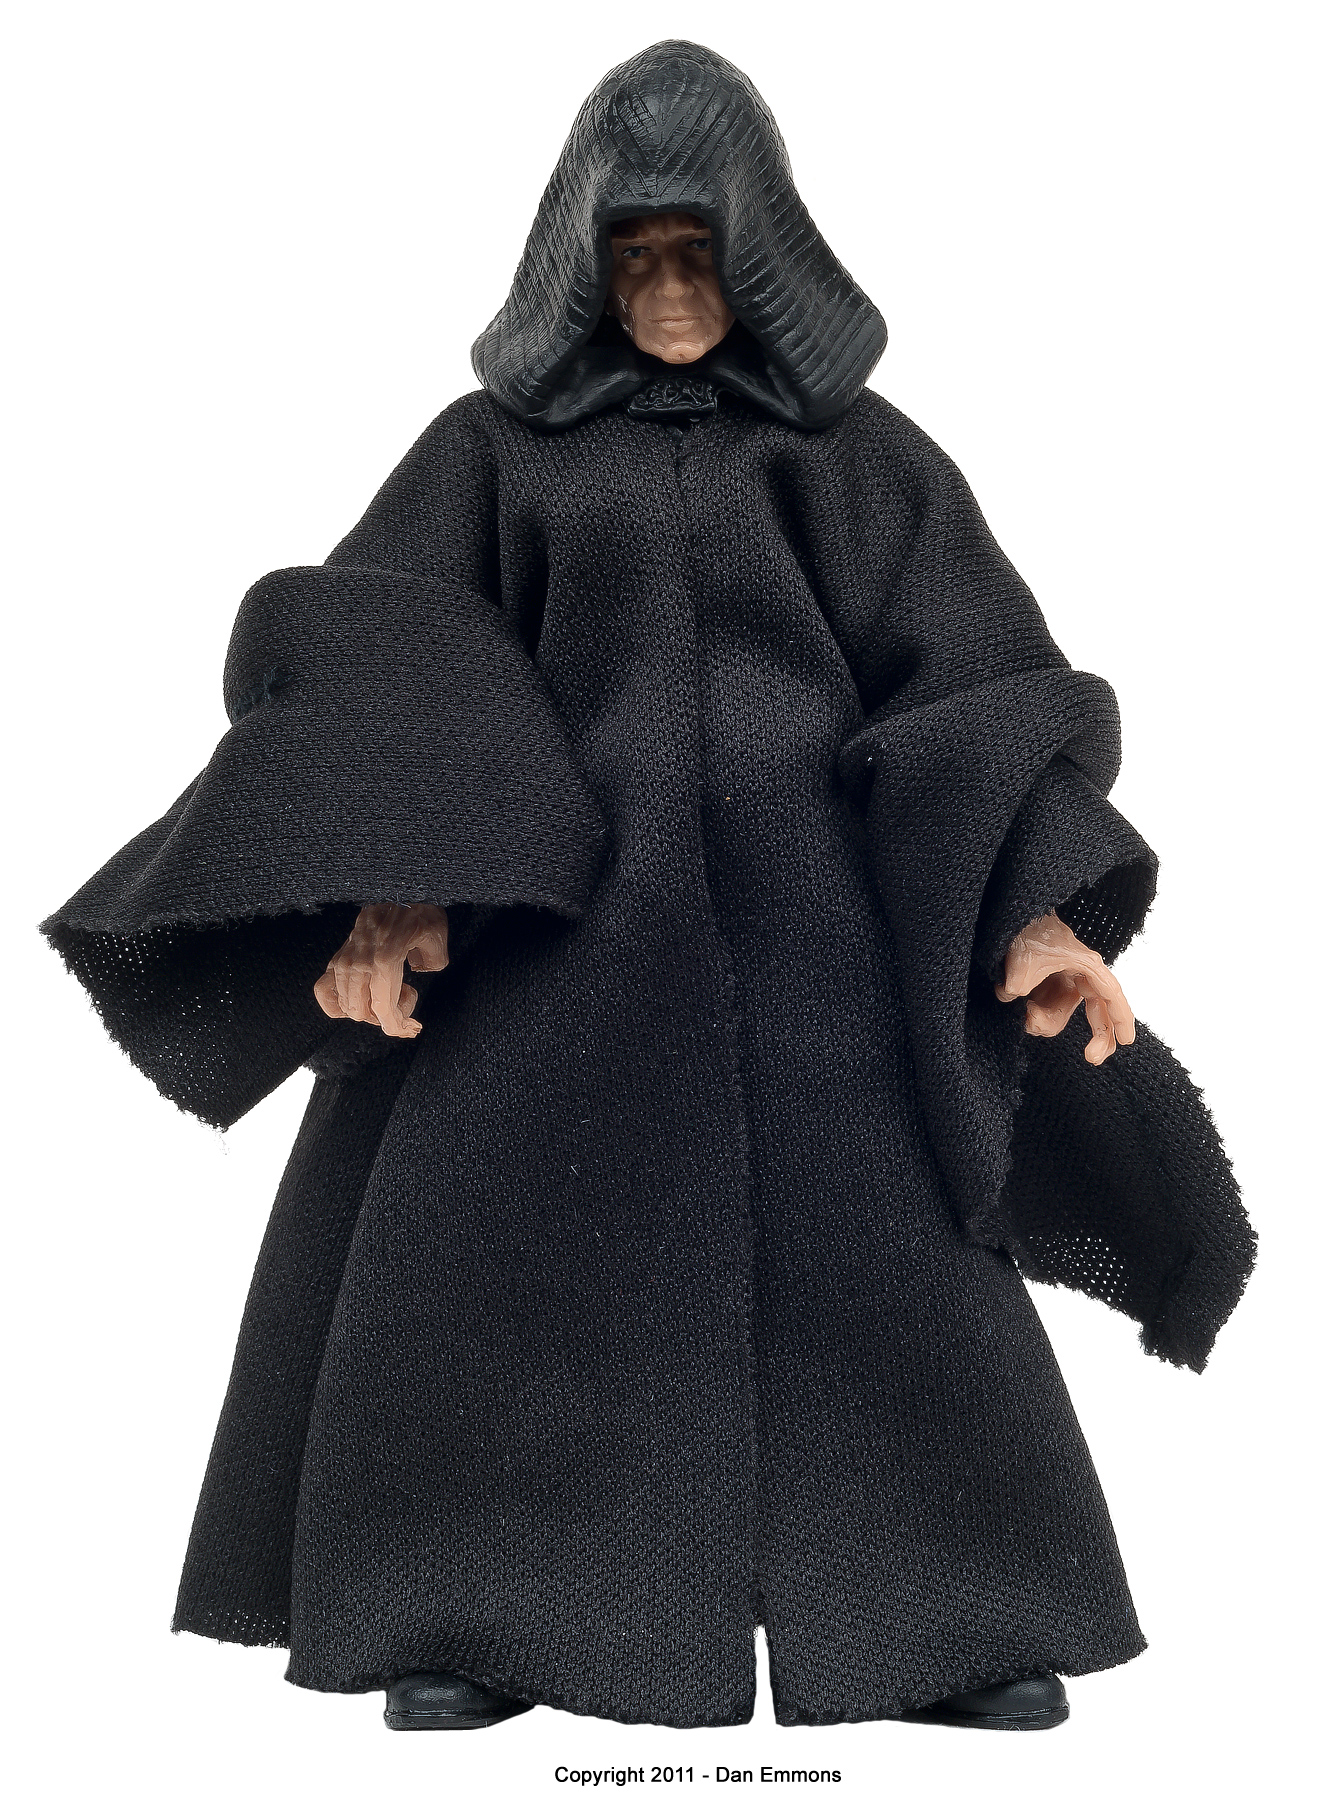 The Vintage Collection - VC79: Darth Sidious